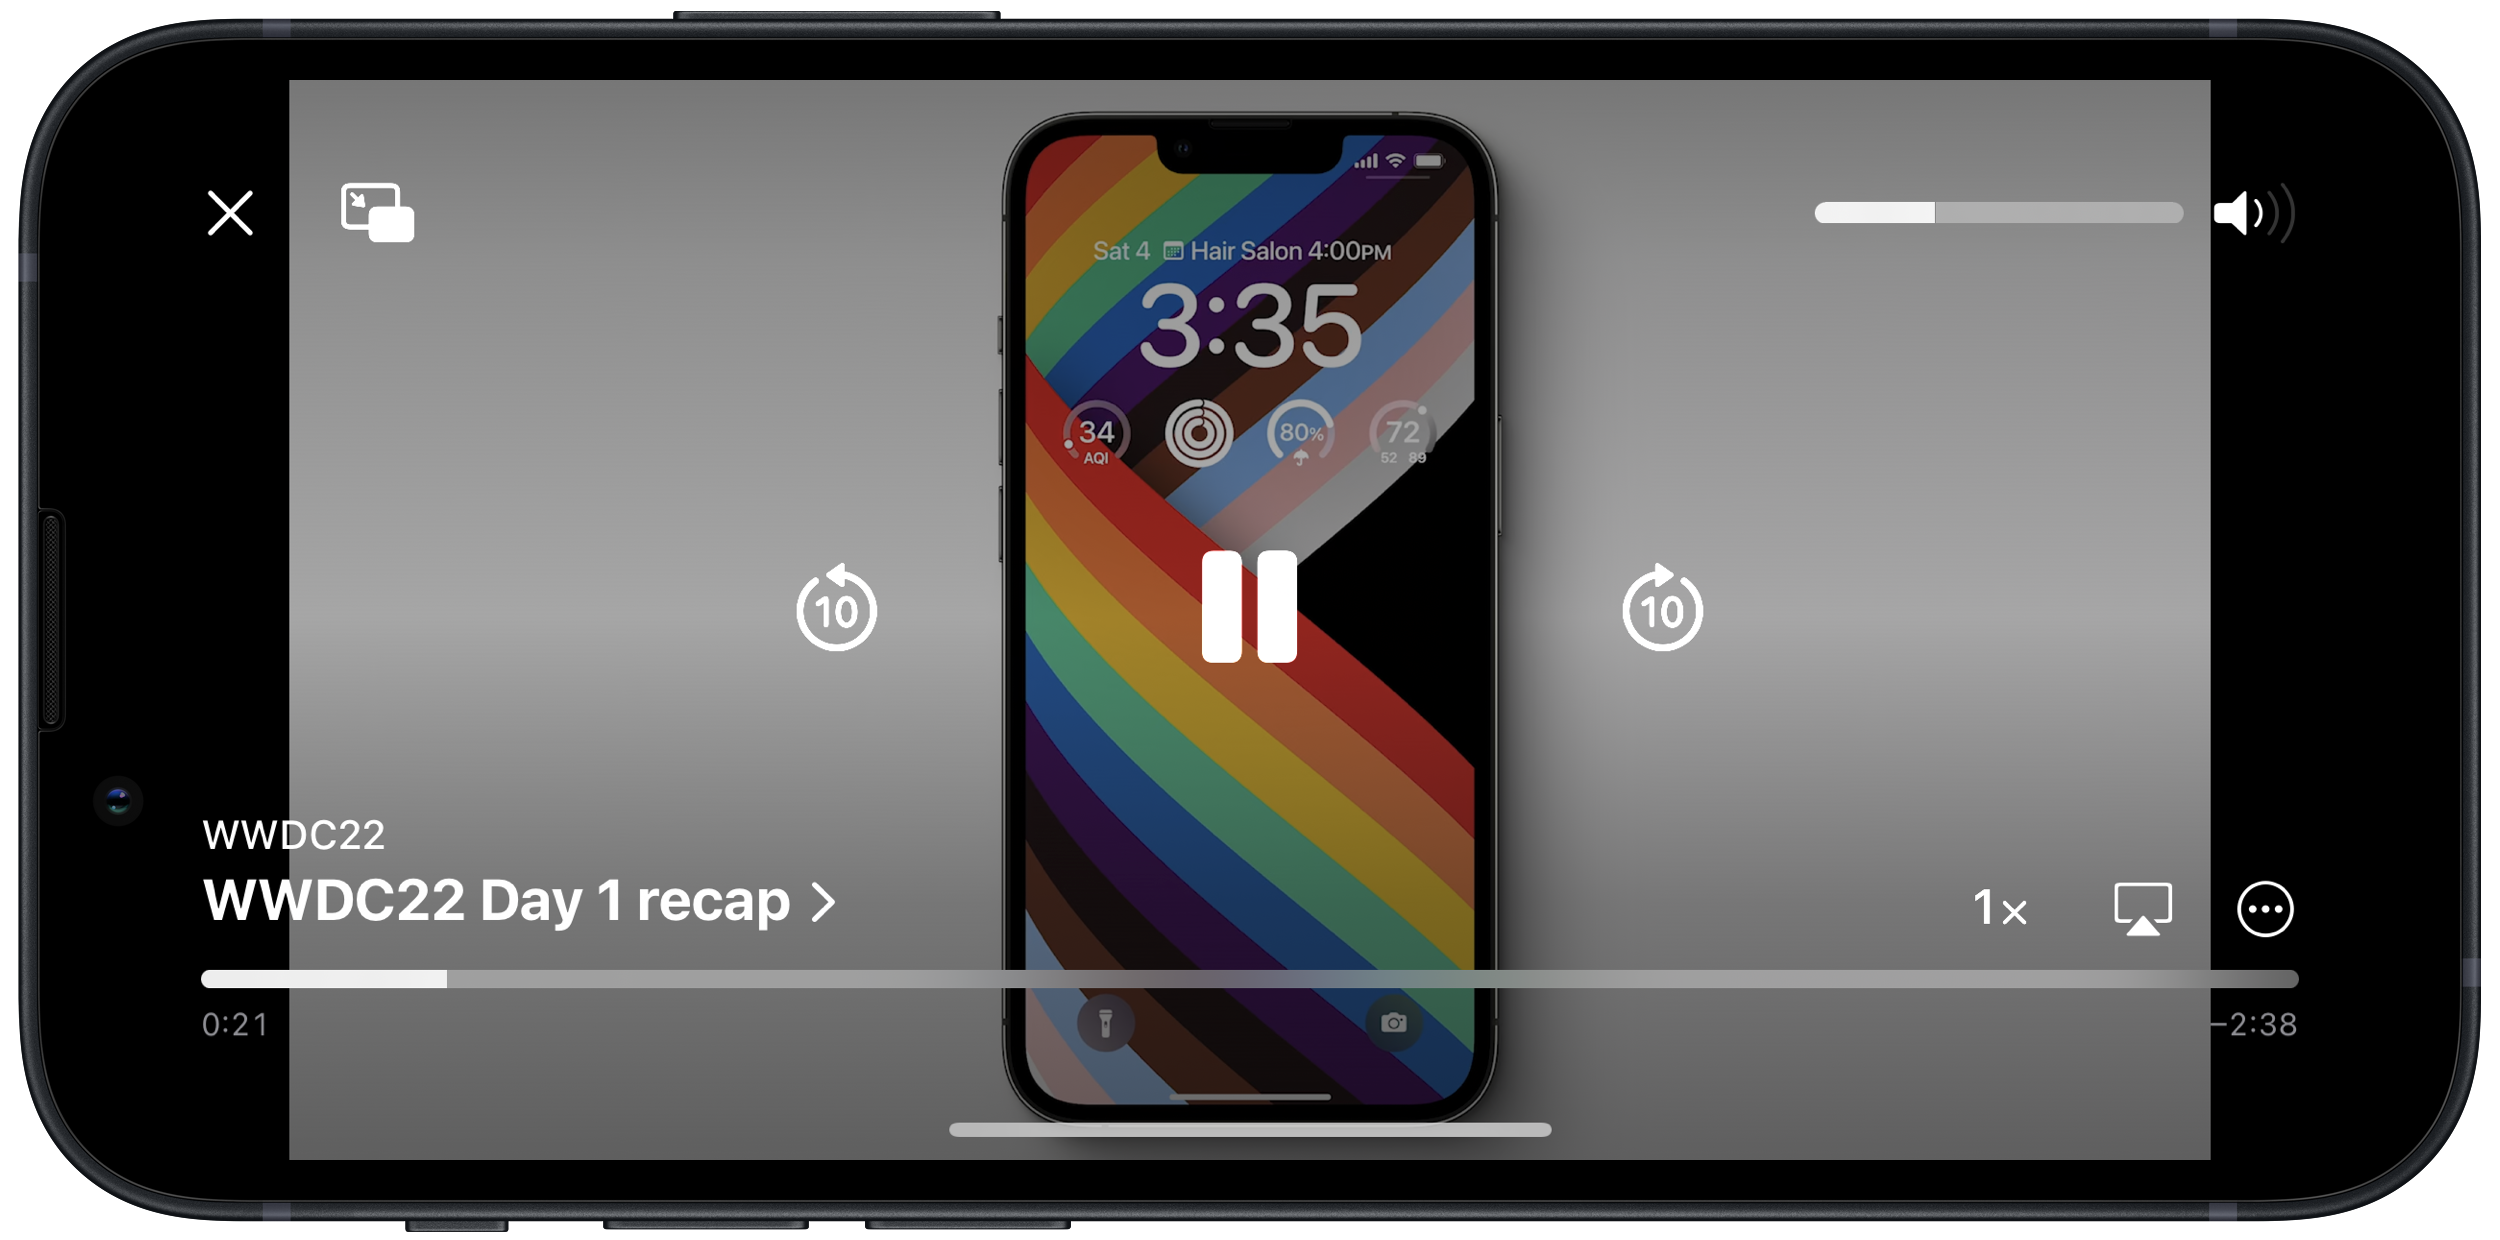 iOS 16 beta 3 lock screen with a video playing and showing the media player controls in landscape orientation